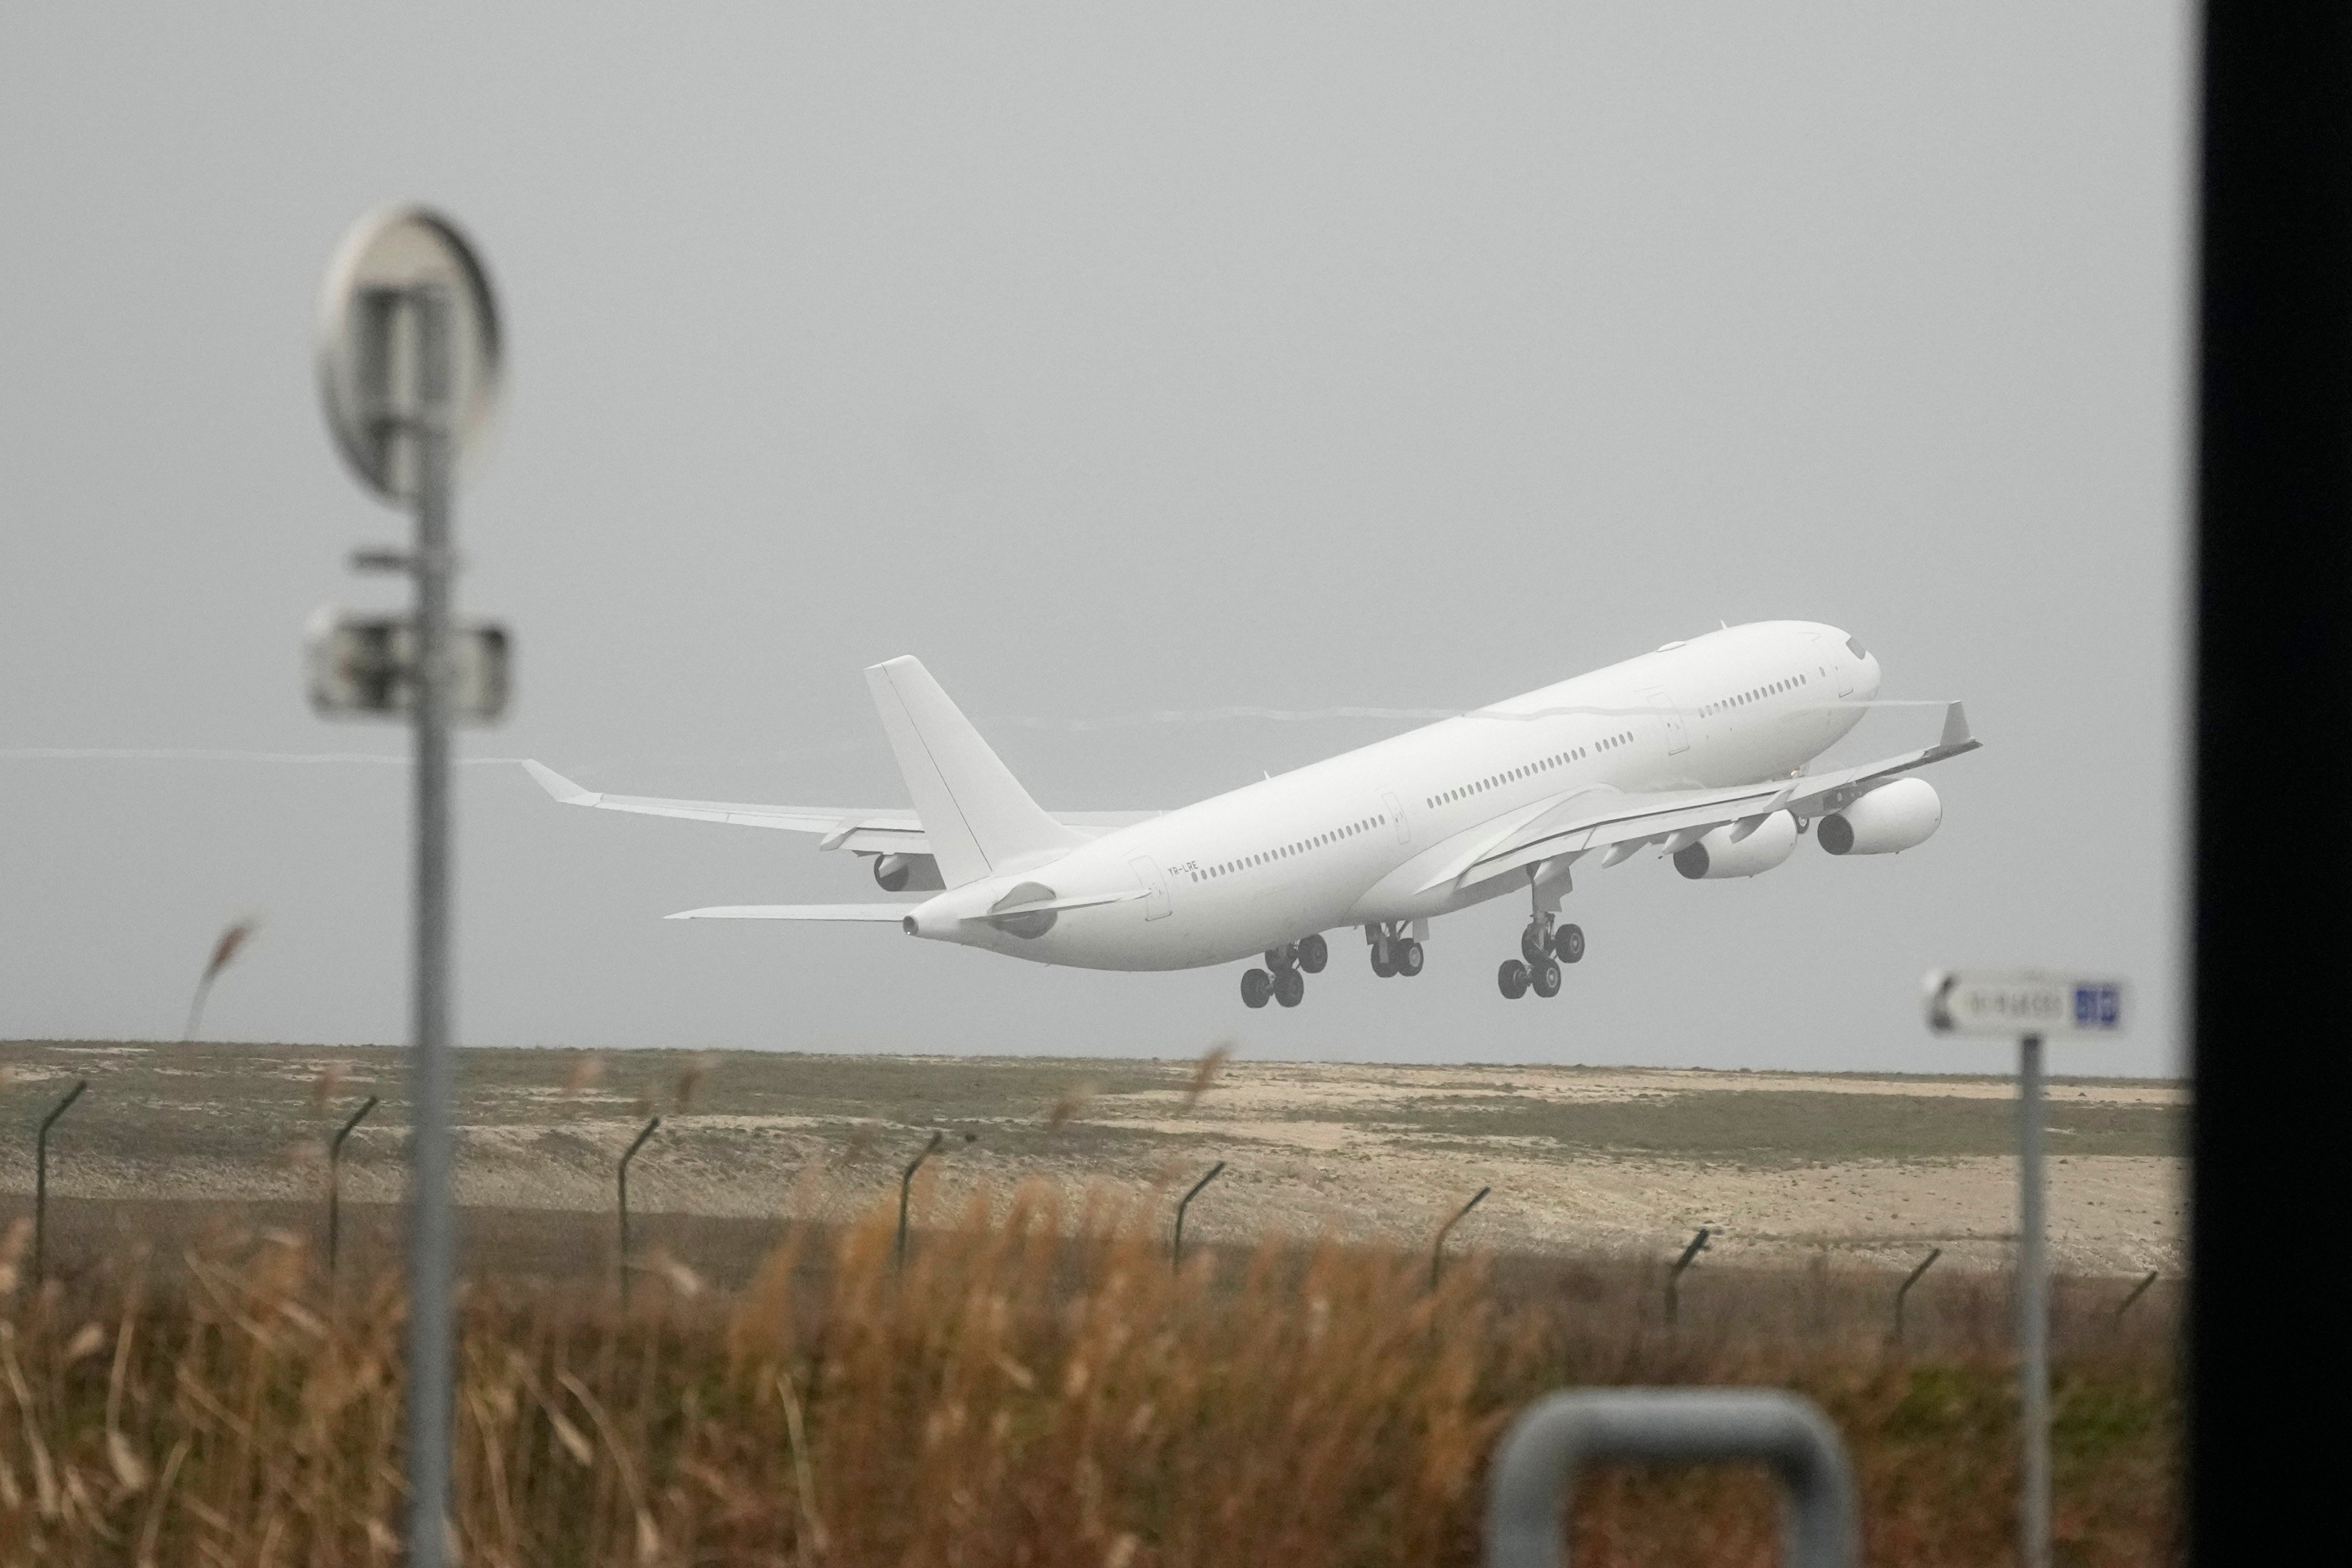 The plane grounded by police at France’s Vatry airport takes off on Monday. Photo: AP